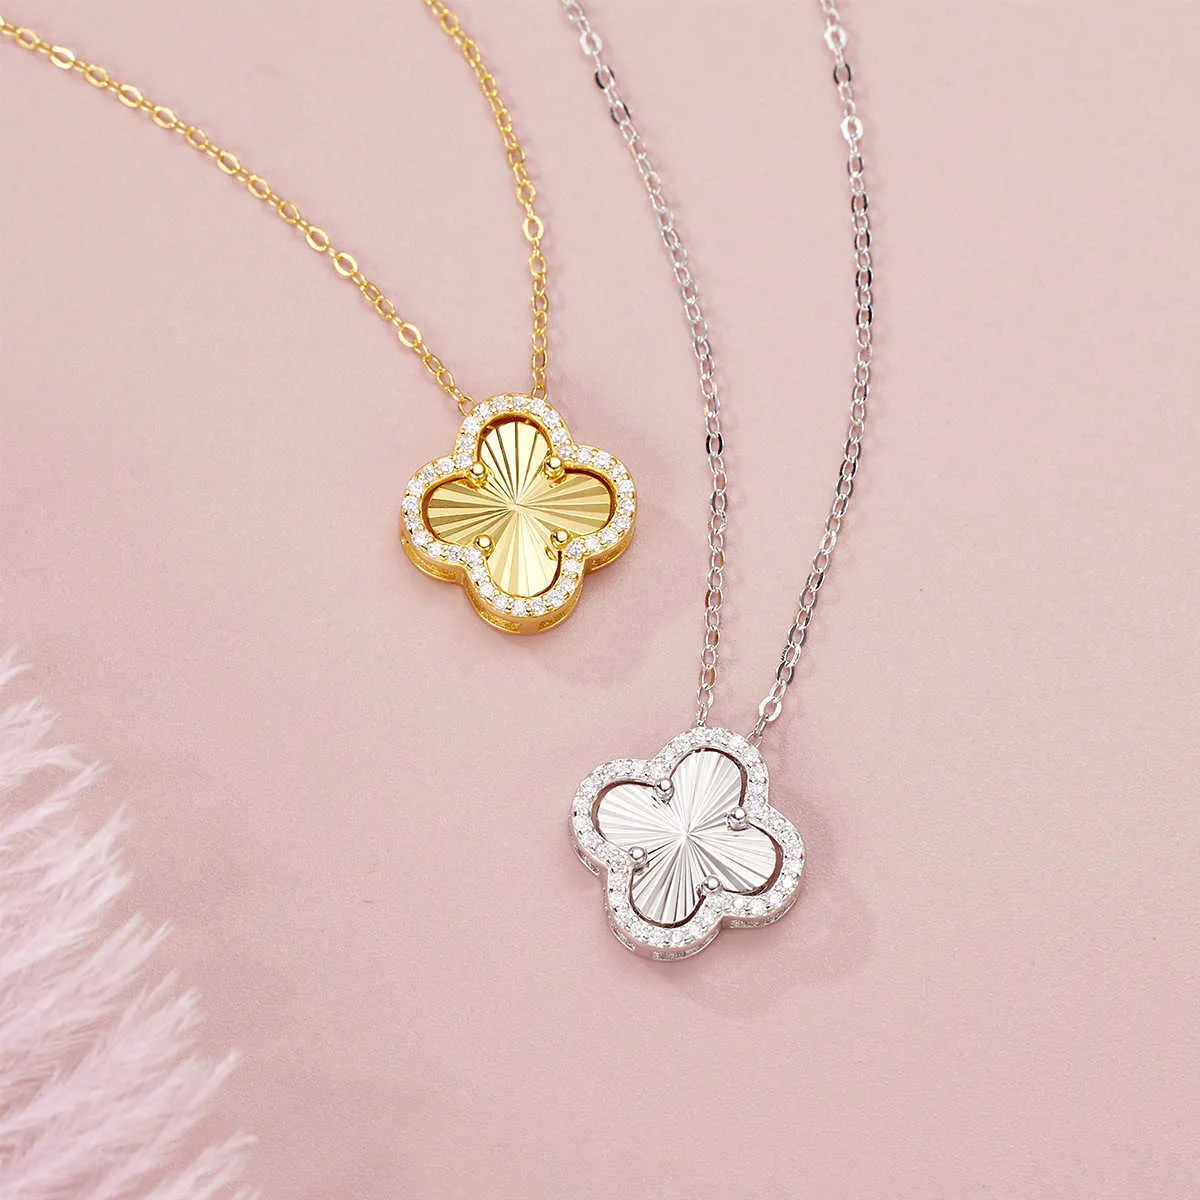 V Necklace Shangyying S925 Sterling Silver A Multi Band Clover Necklace Nisch Light Luxury High-End Design och Versatile CollarBone Chain